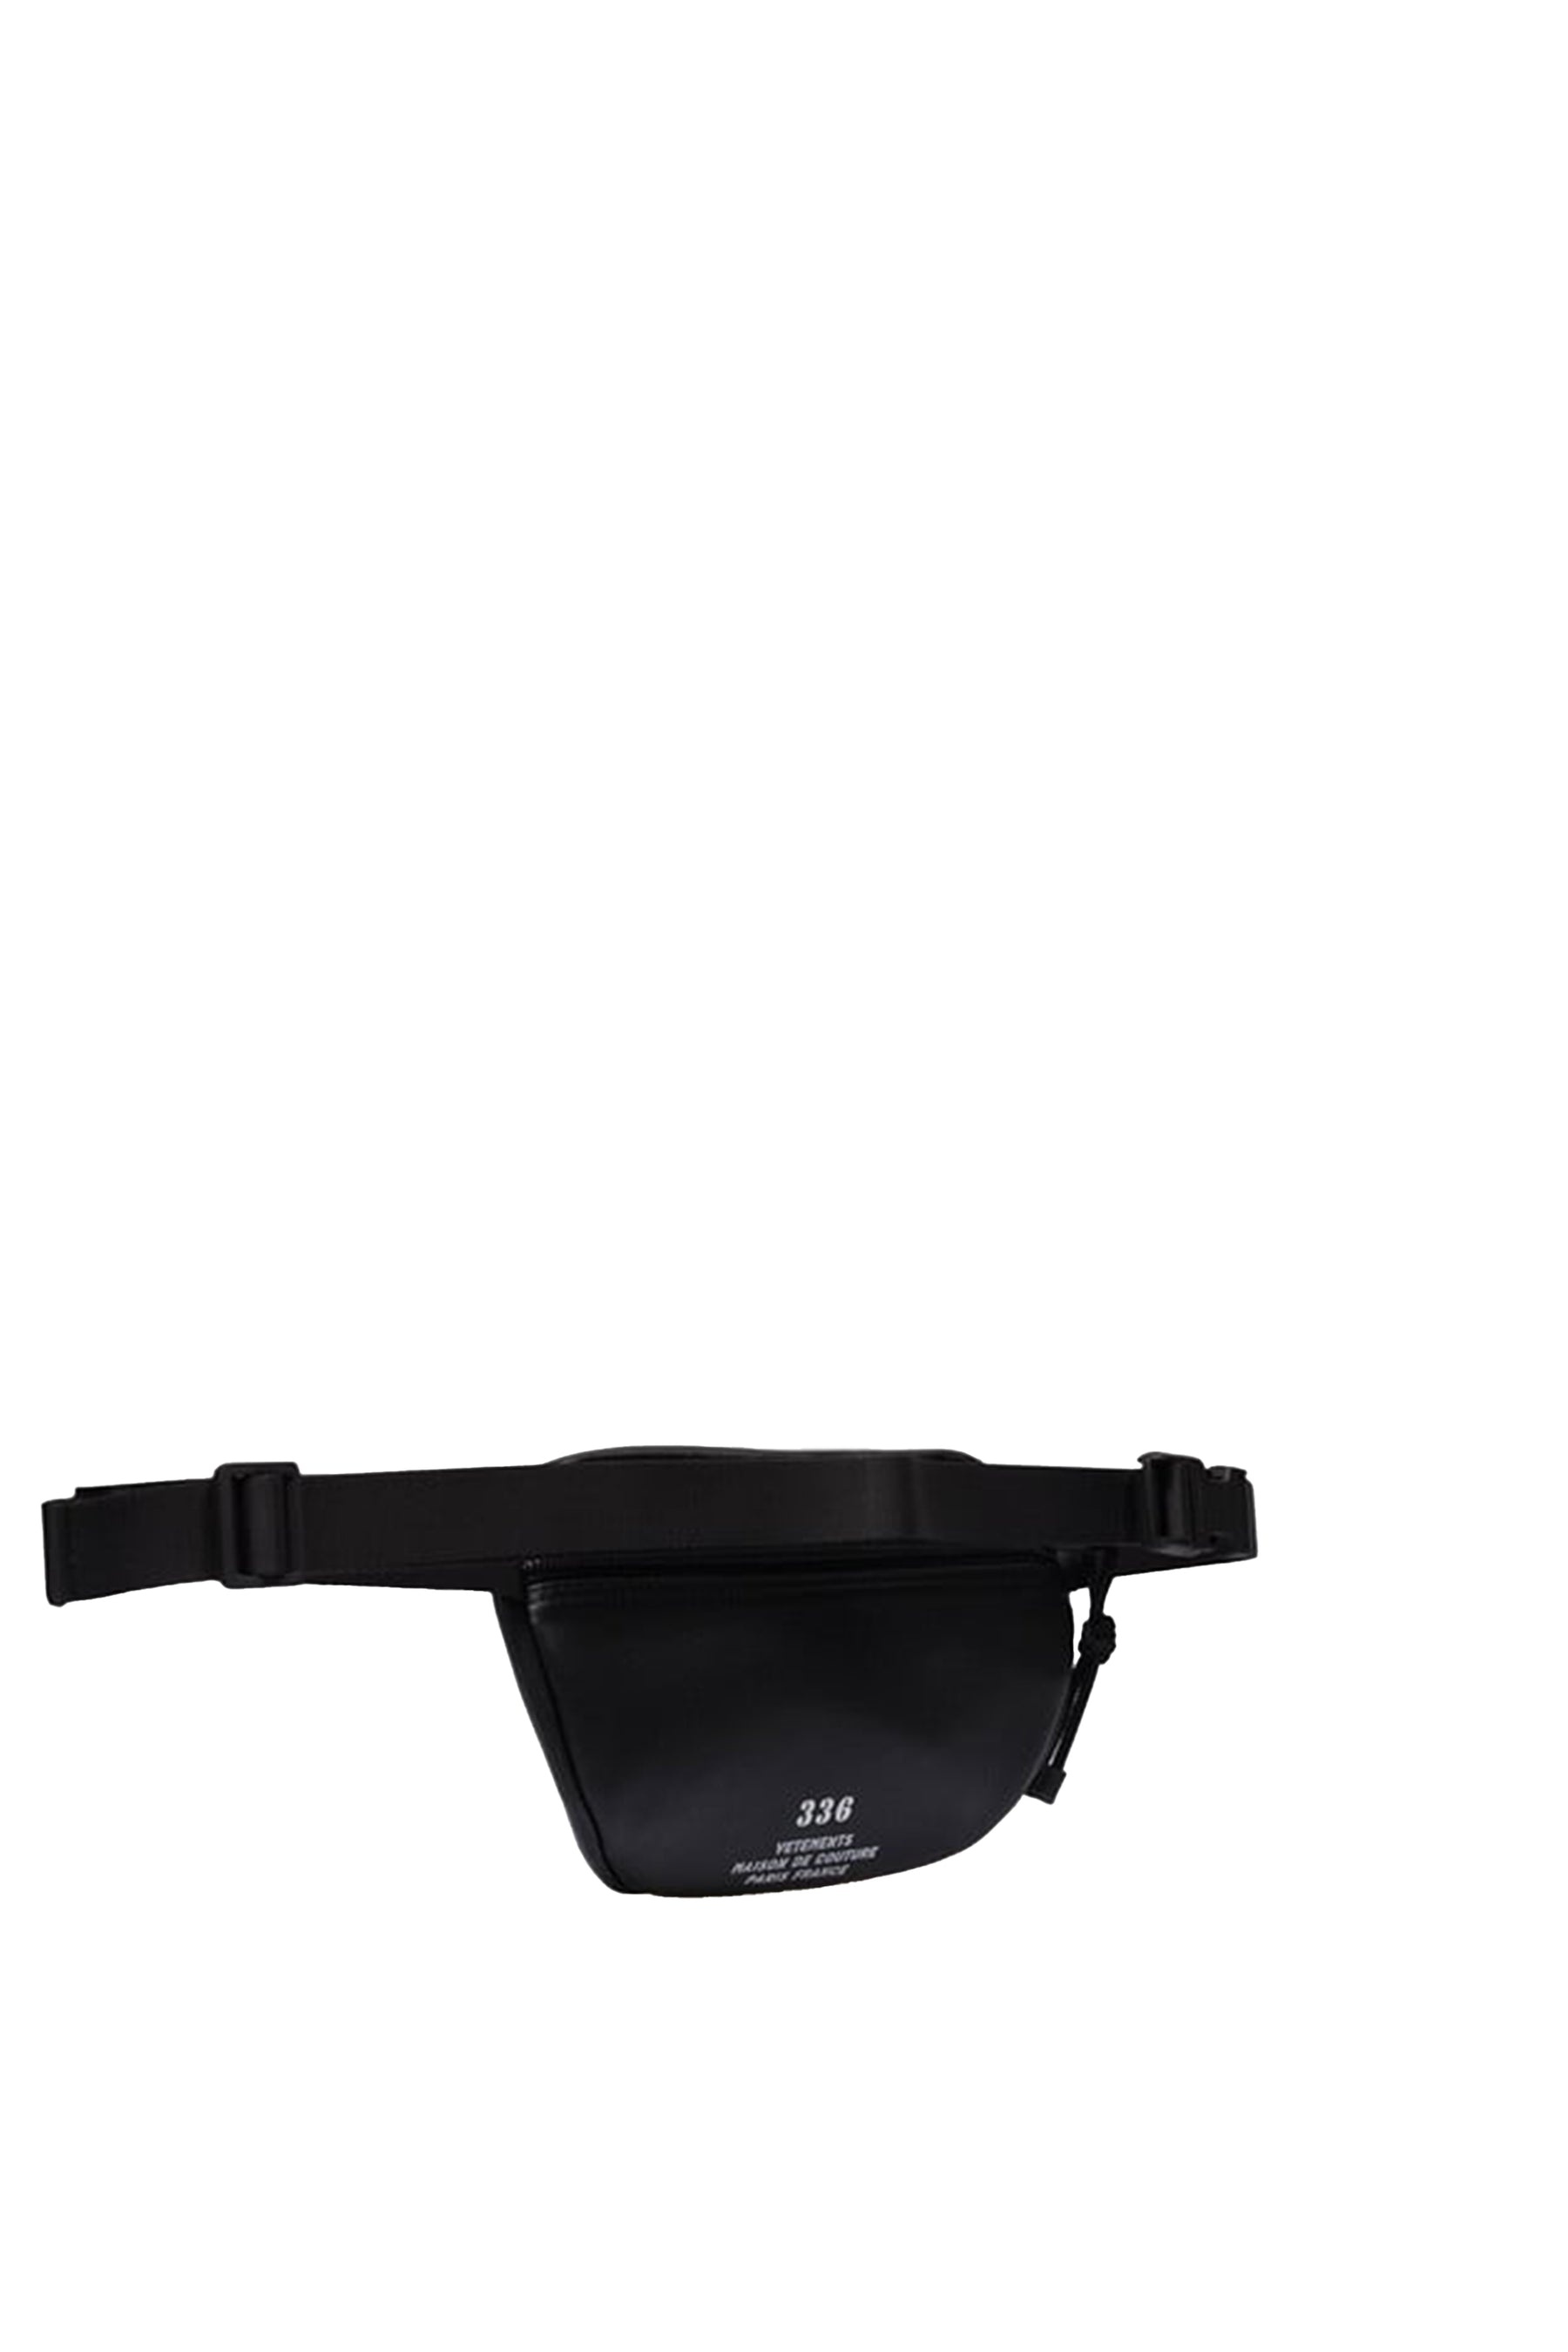 HAUTE COUTURE LEATHER FANNY PACK / BLK - 2